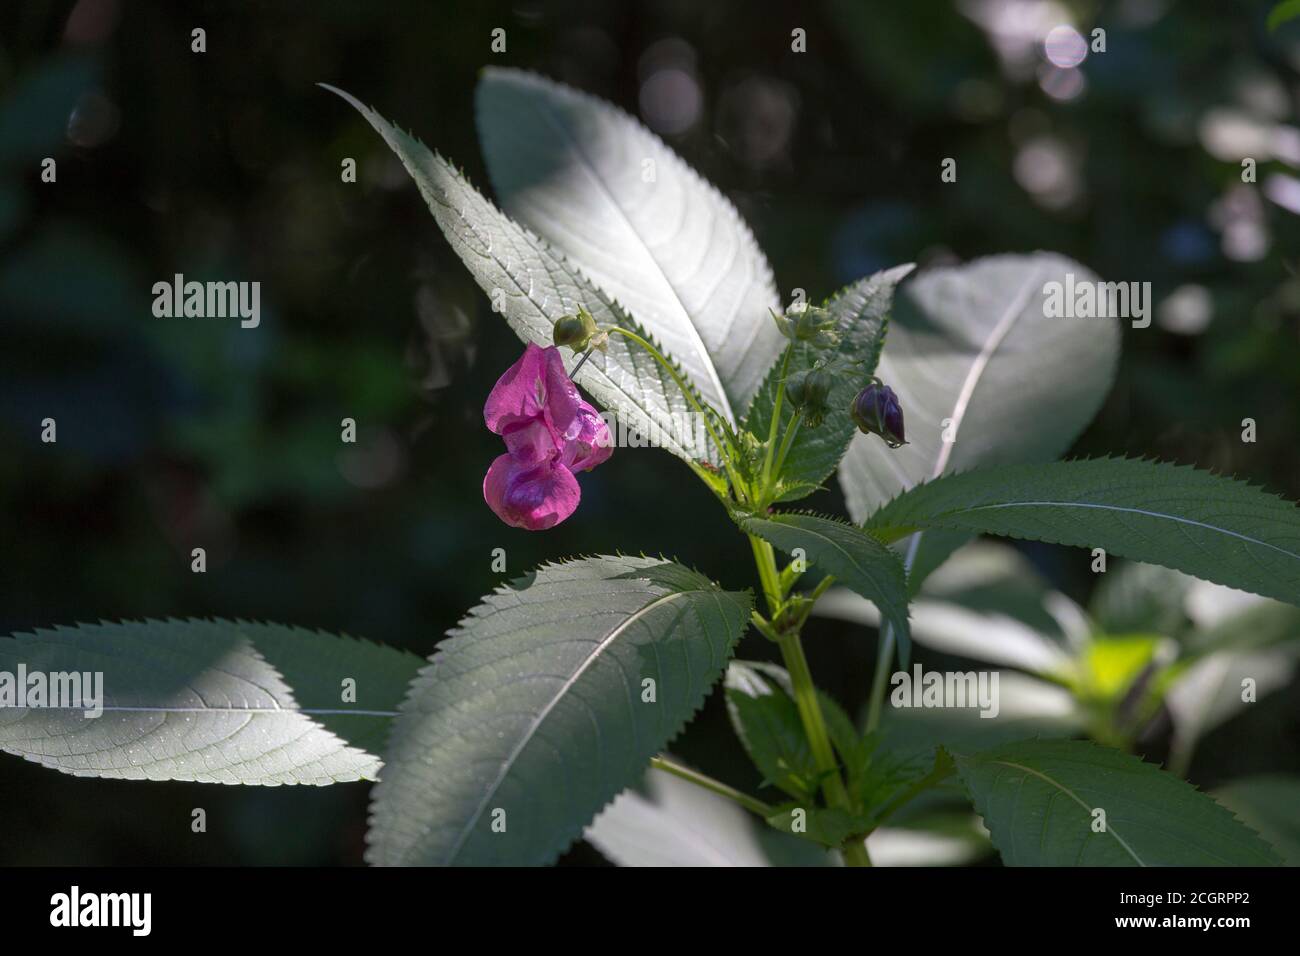 A plant of impatiens glandulifera with flower in Italy Stock Photo